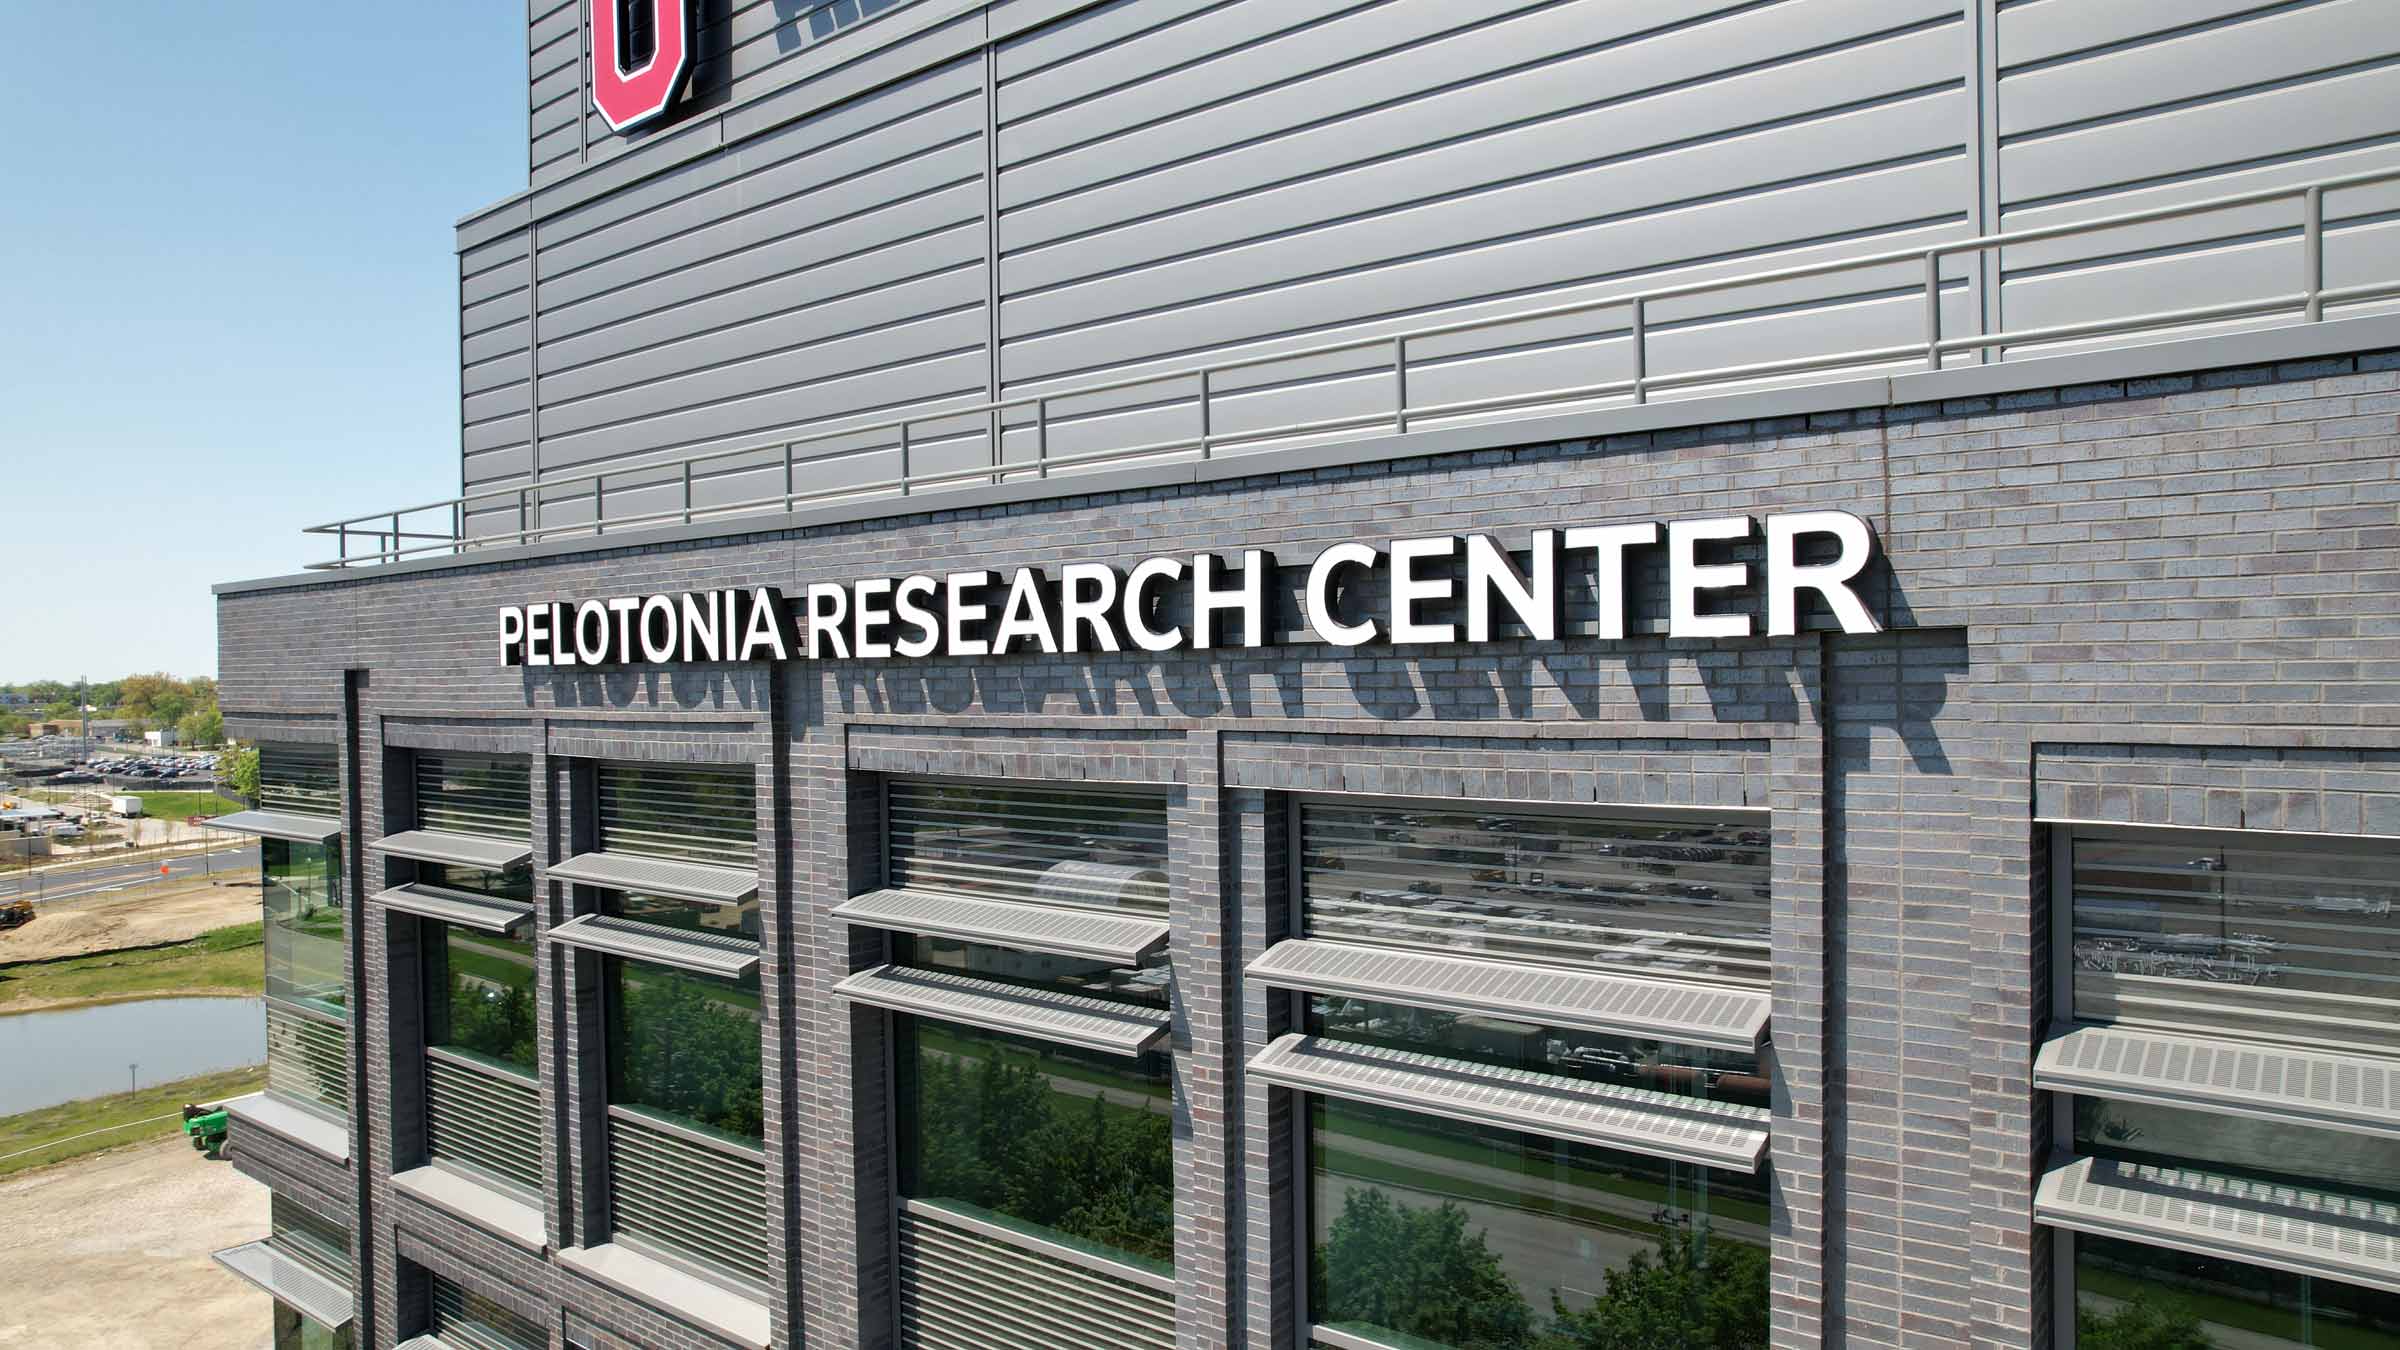 Pelotonia Research Center opens to rapidly accelerate research